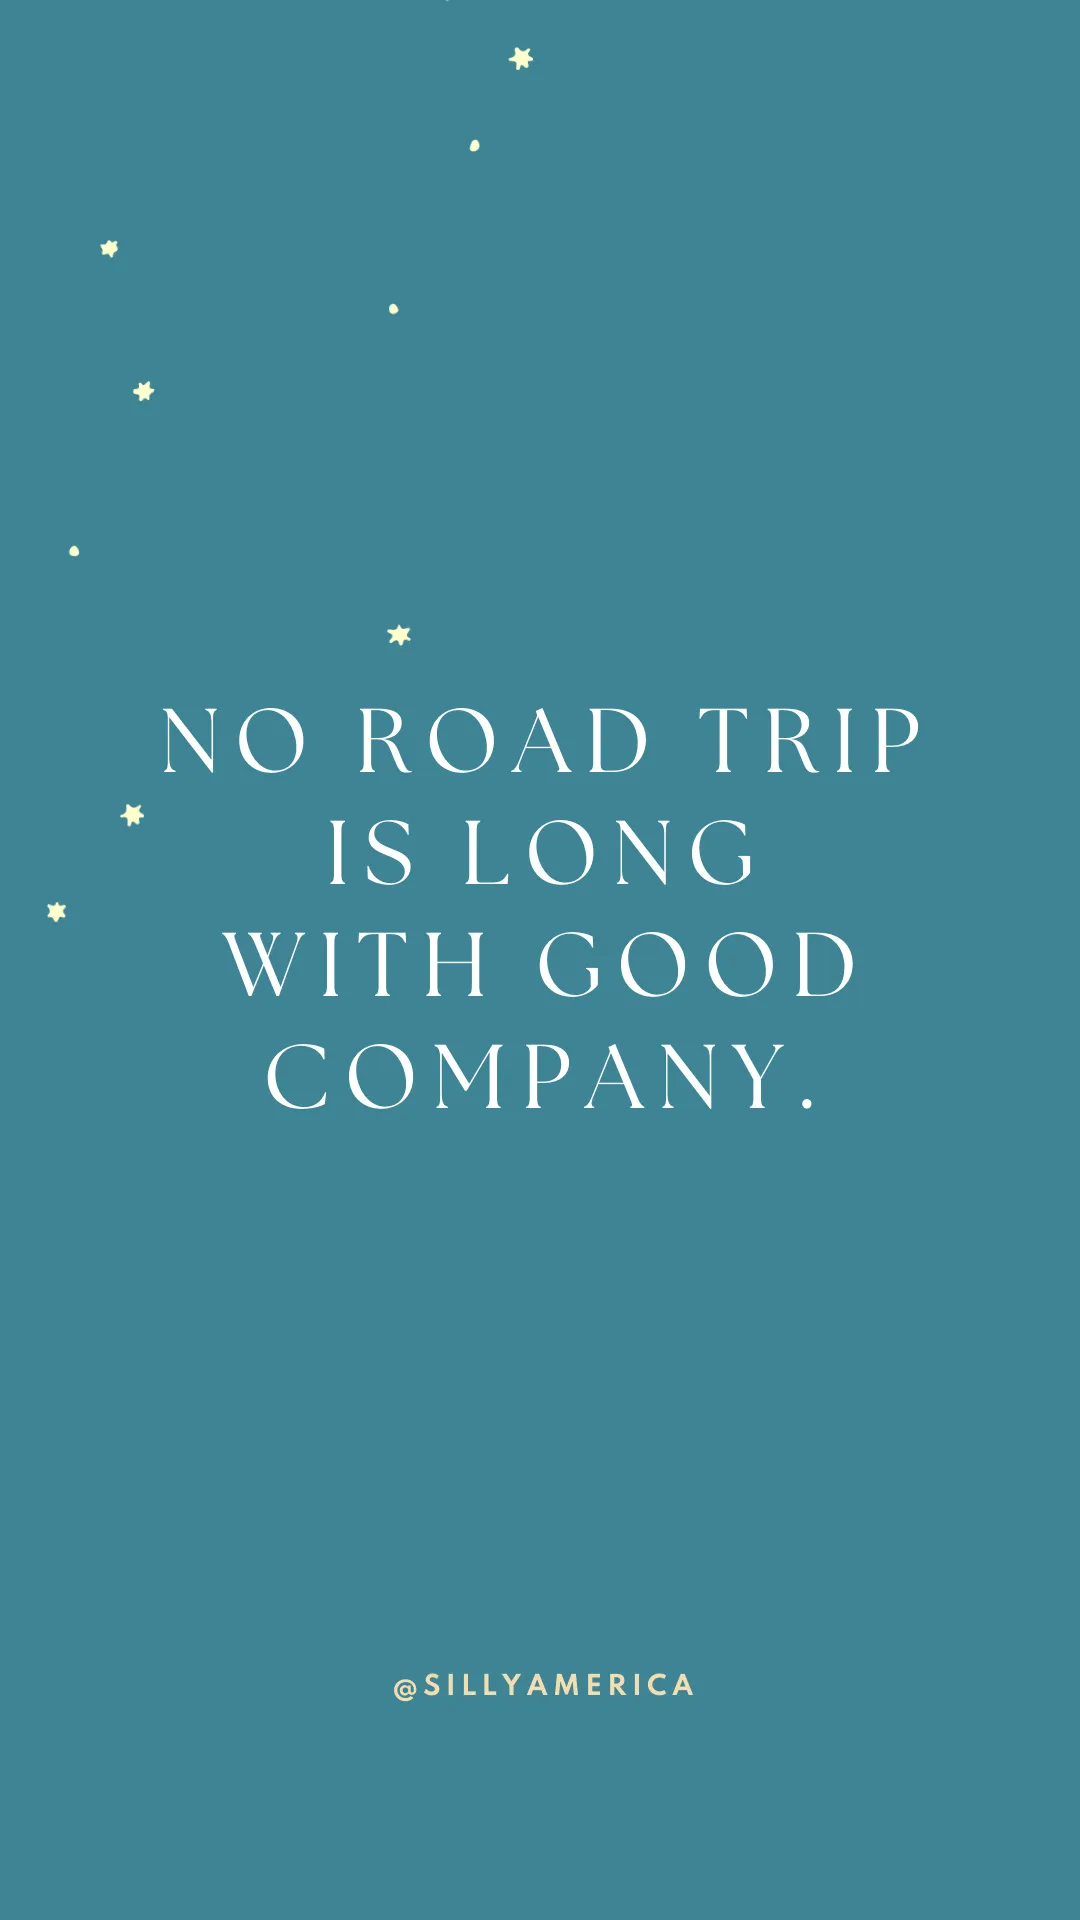 No road trip is long with good company. - Road Trip Captions for Instagram